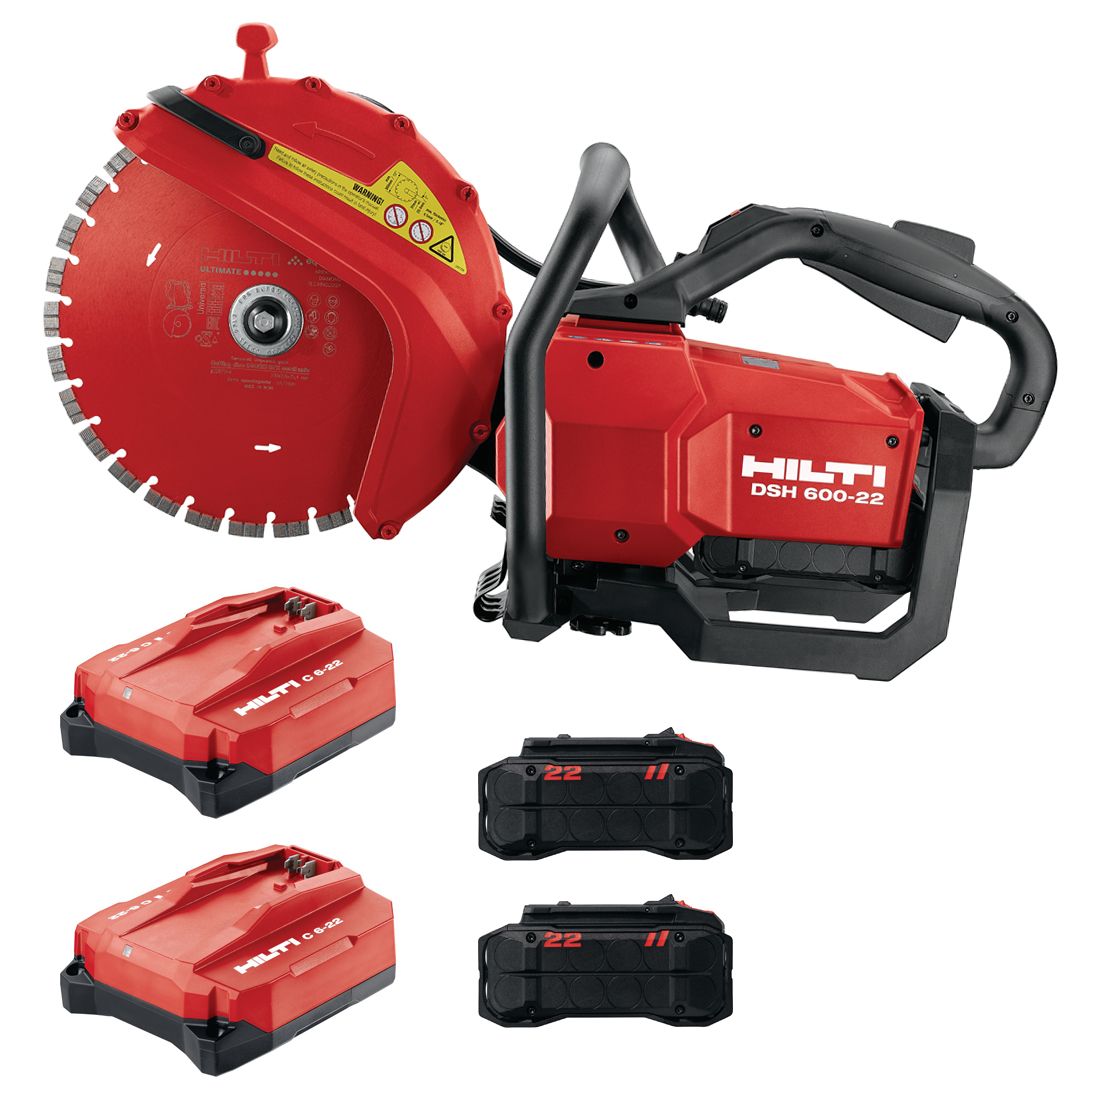 Hilti NURON Cordless Cut-off Saw, 2x 8Ah Batteries, 2x Chargers, Carrying Case